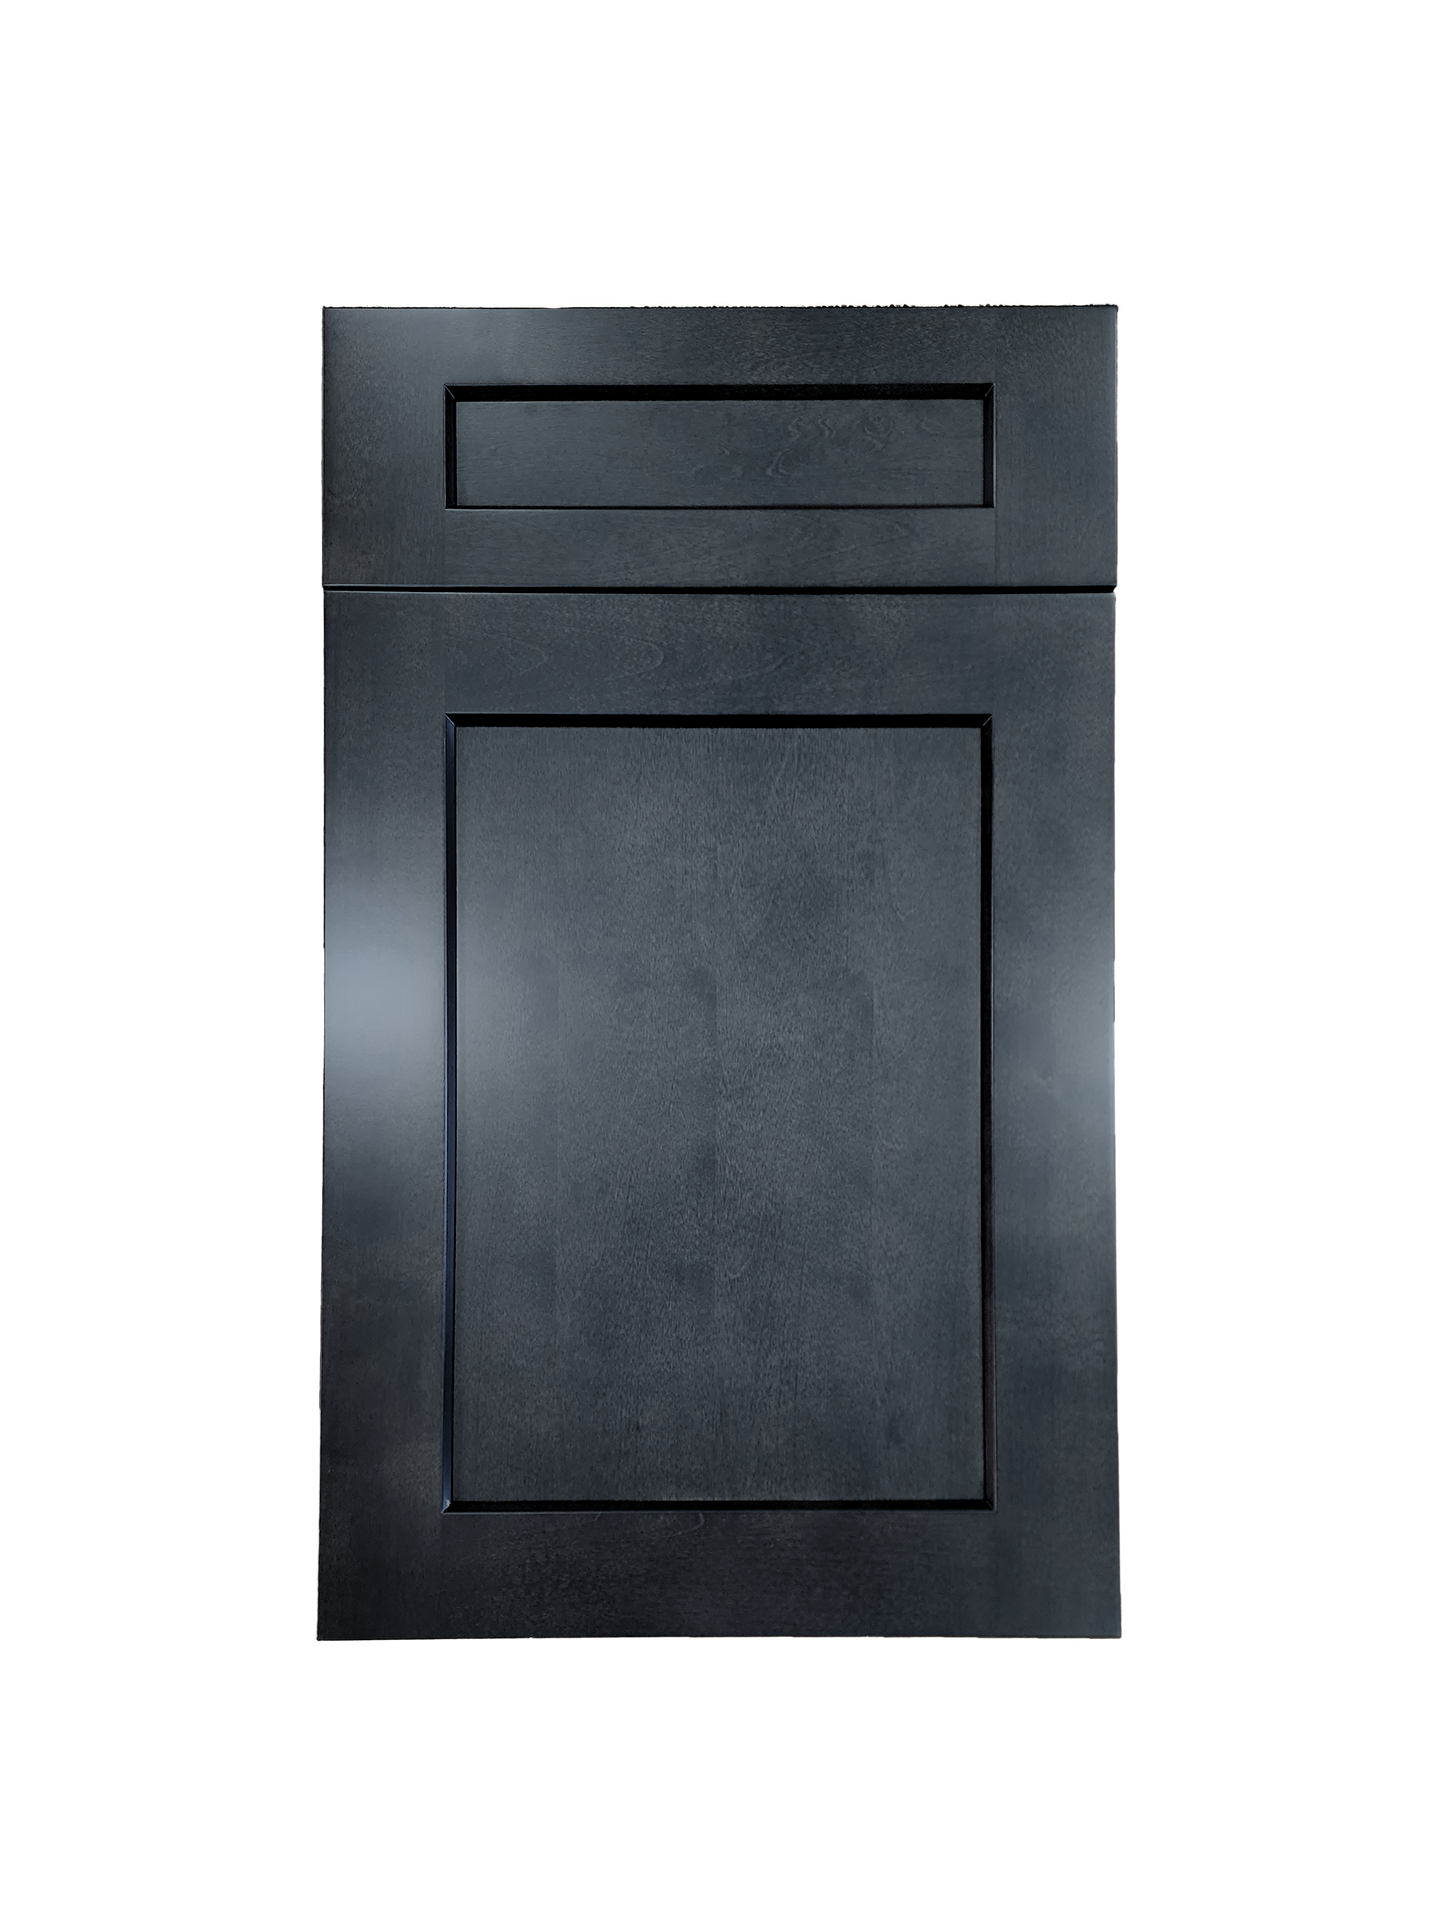 Stormy Grey Base Cabinet 12 inches wide 24 inches deep 34.5 inches tall with Stormy Grey box and Stormy Grey doors